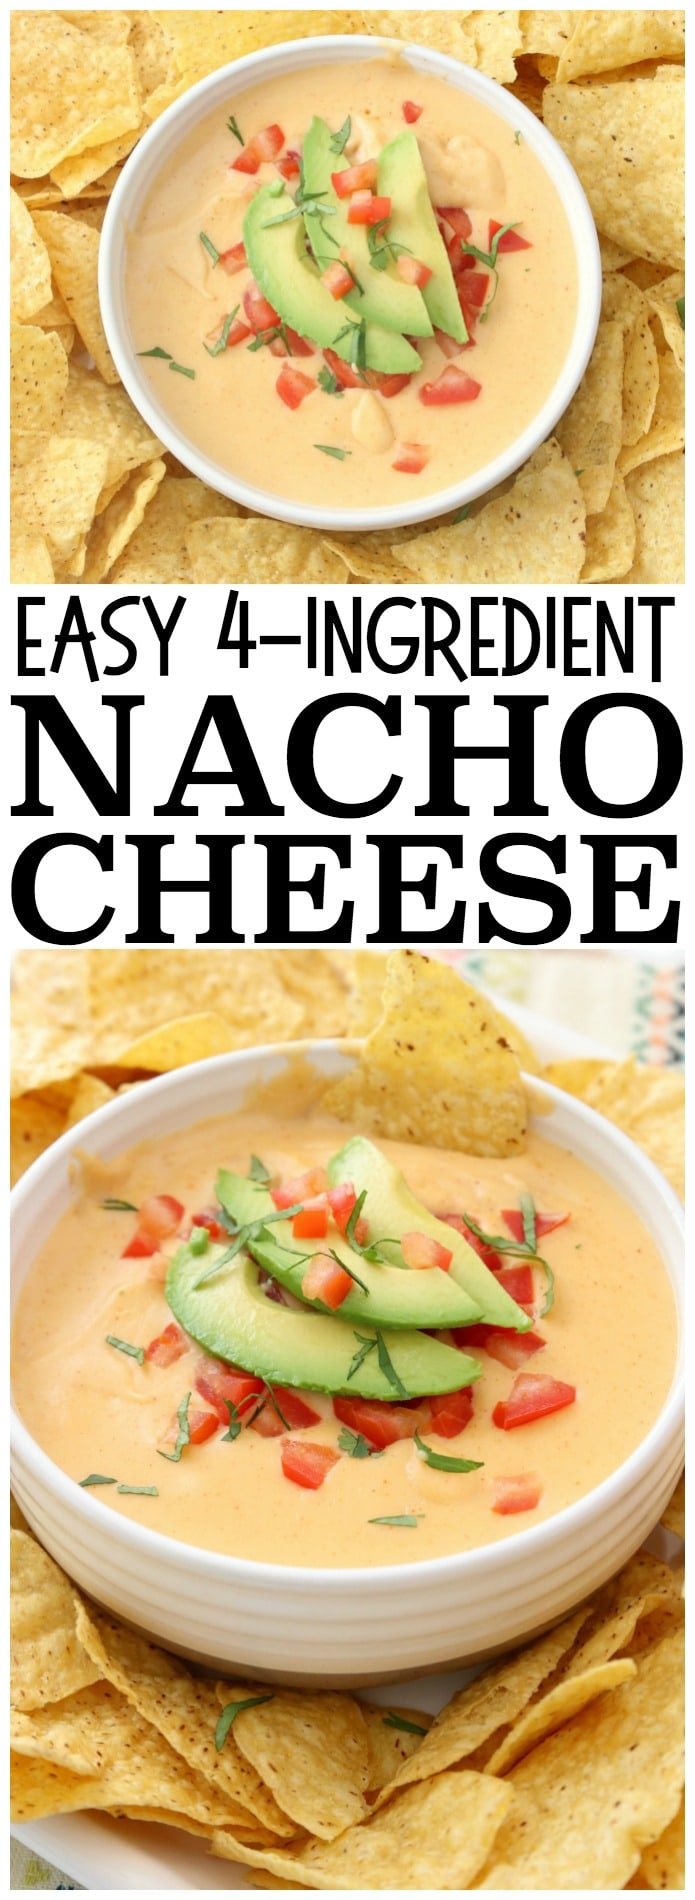 Easy Nacho Cheese sauce recipe with only 4 ingredients and is made in minutes! Smooth, creamy with great nacho cheese flavor, this appetizer recipe is perfect for parties, busy weeknight dinners and game day food!